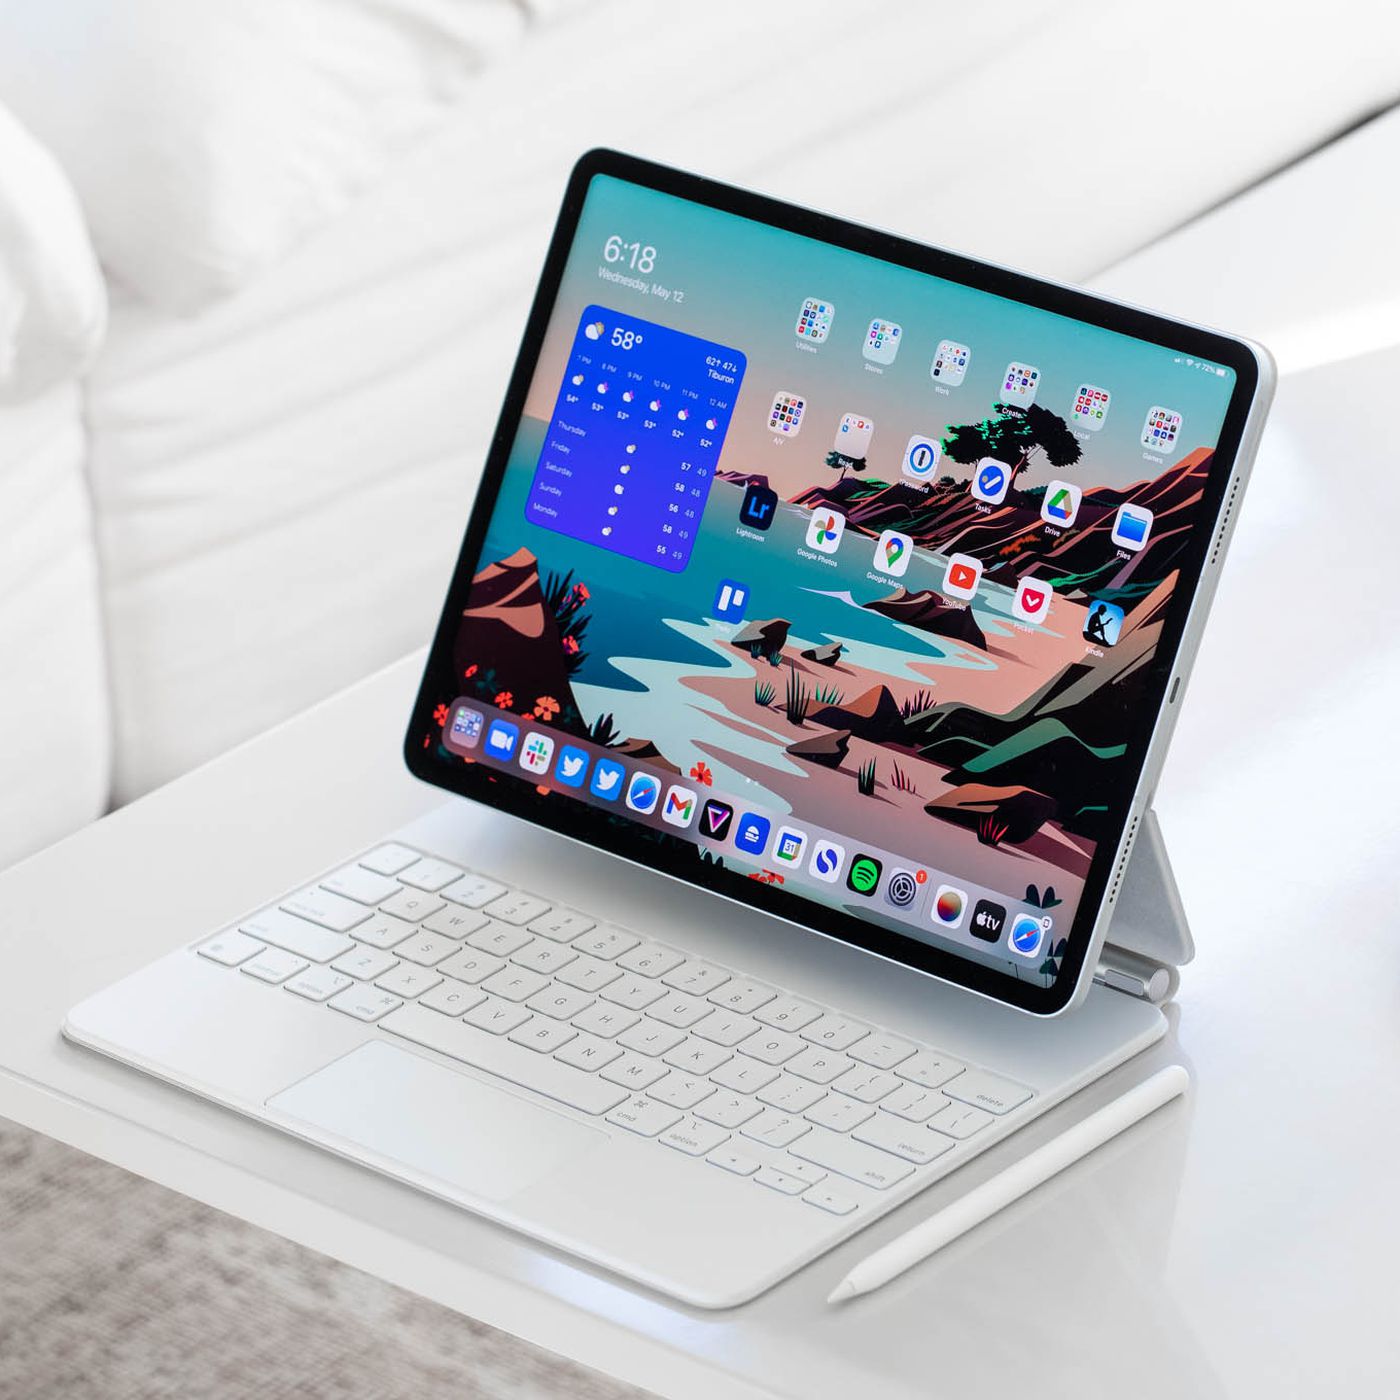 Apple iPad Pro 11-inch review